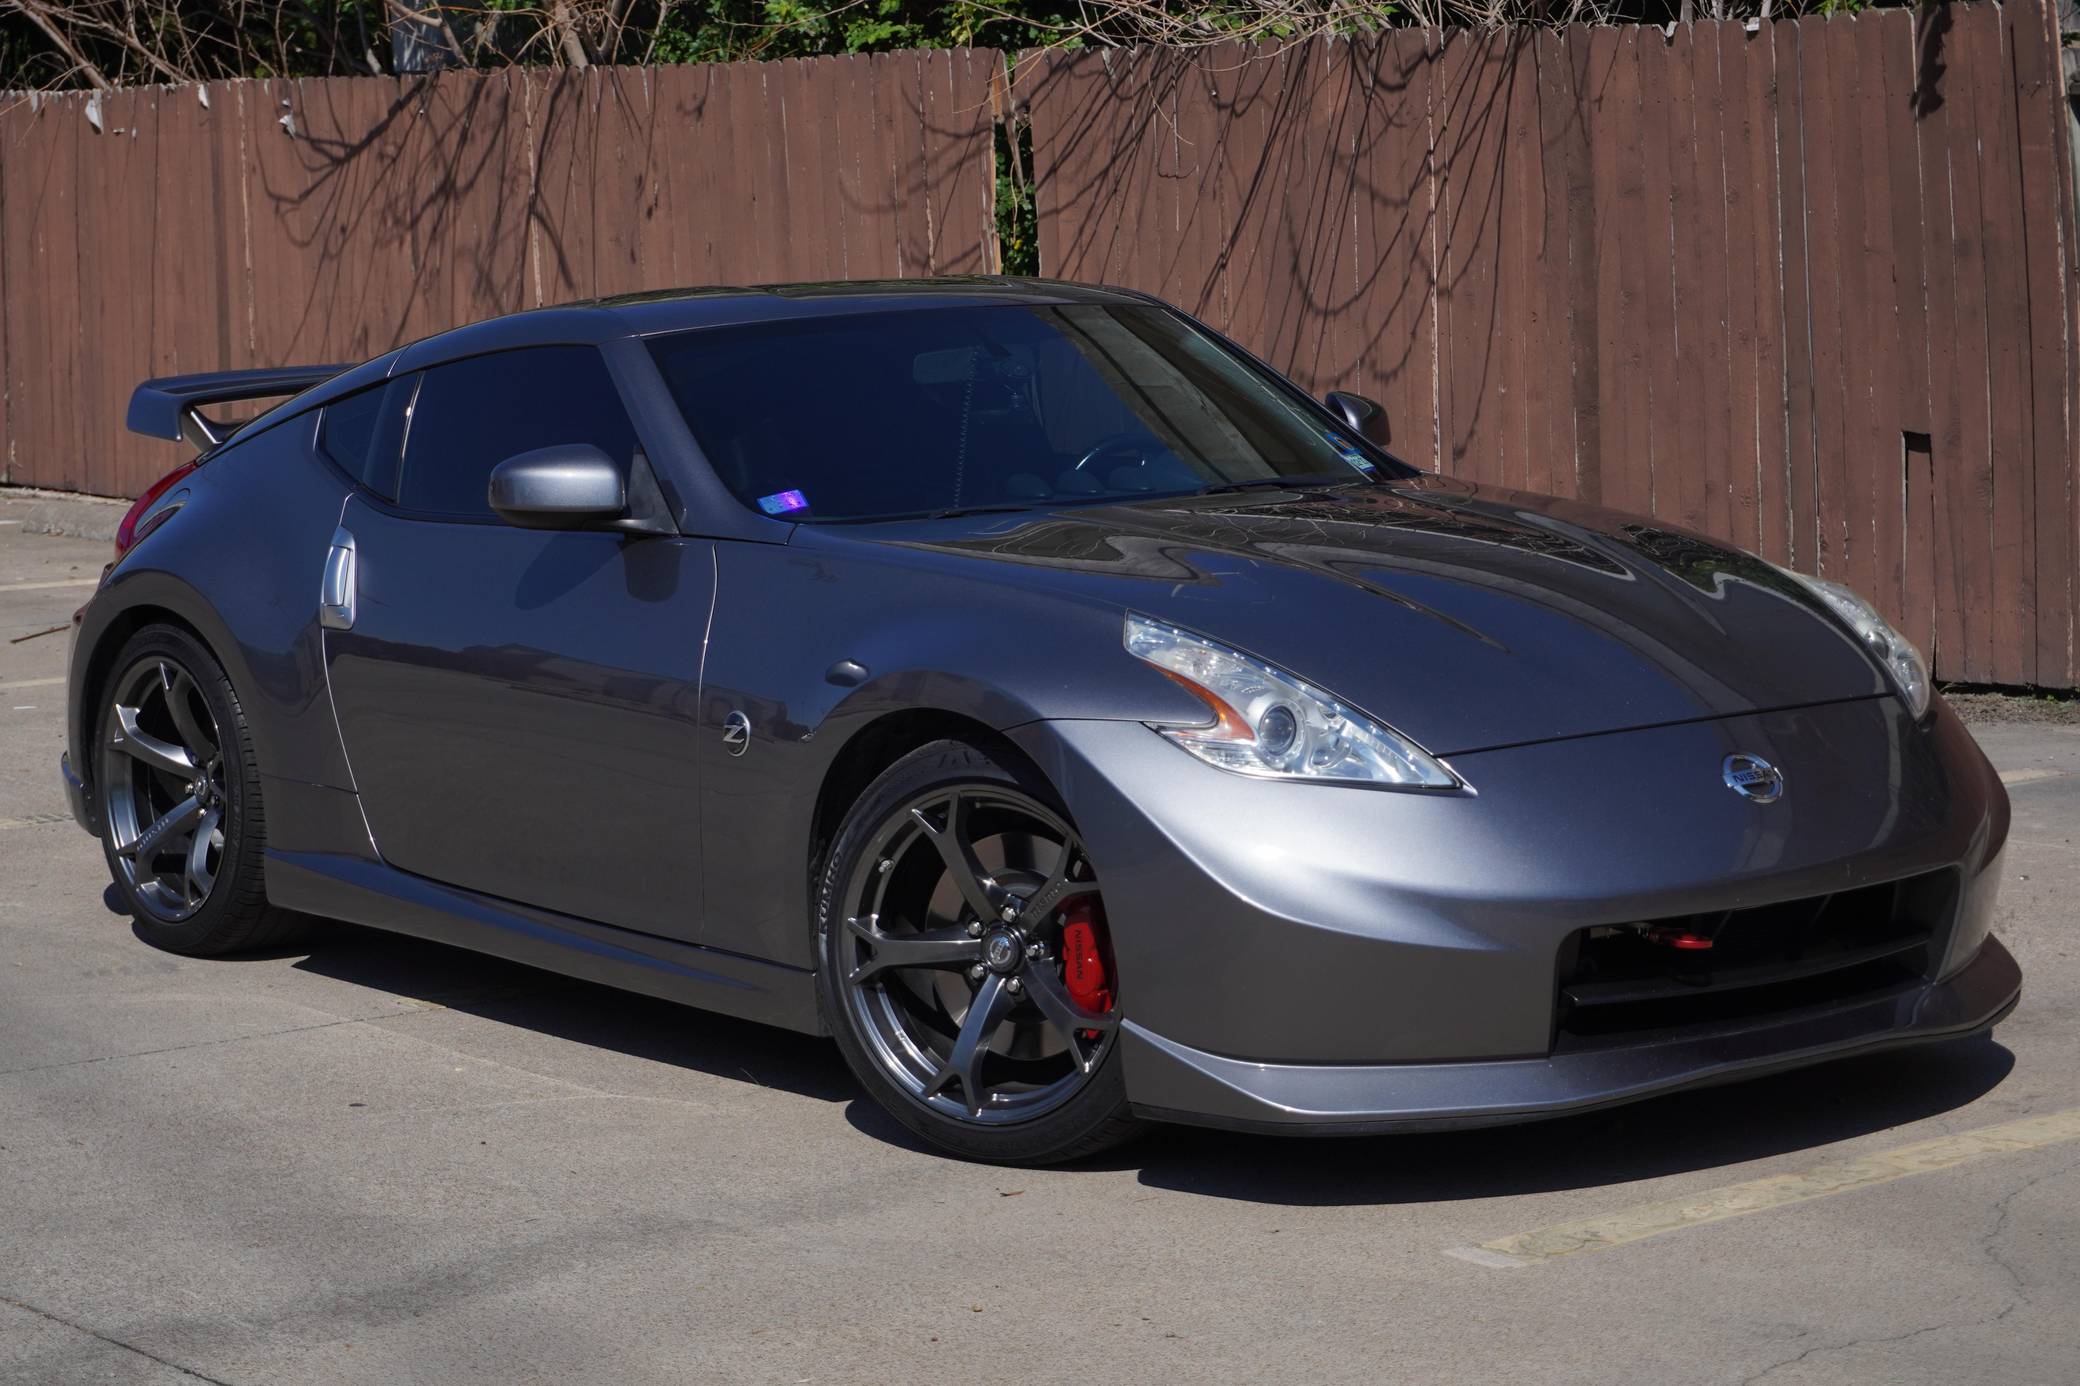 2013 Nissan 370Z Nismo For Sale Cars Bids, 56% OFF